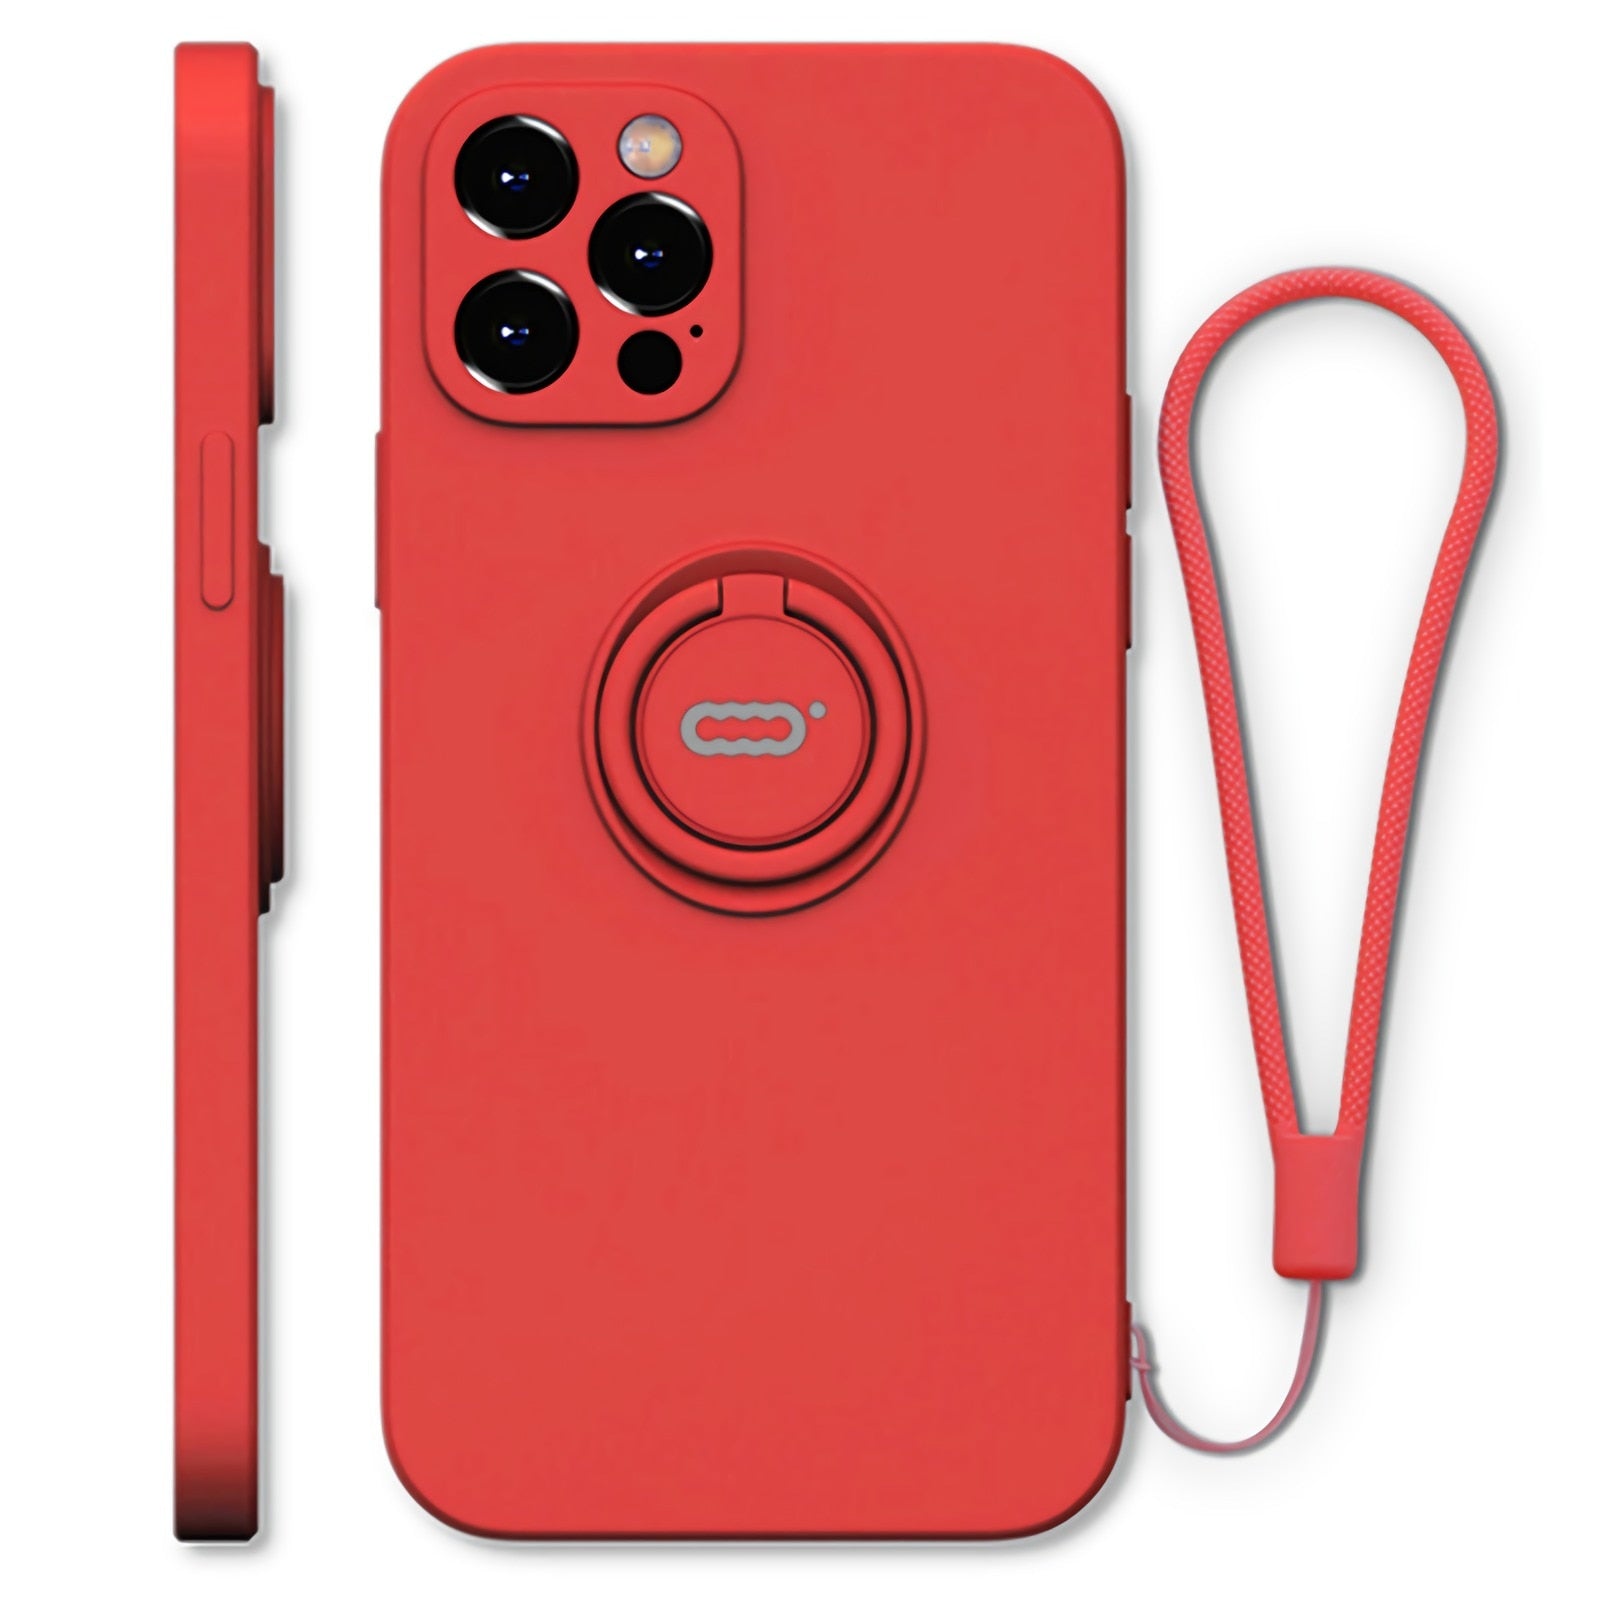 Red Color Case - iPhone 7/8/X/XR/XS/XS Max/SE(2020)/11/11 Pro/11 Pro Max/12/12 Pro/12 Mini/12 Pro Max, 360 Ring Holder Kickstand - Anti-Scratch Protective Case - 380230 for iPhone 7 8 / Red / United States Find Epic Store